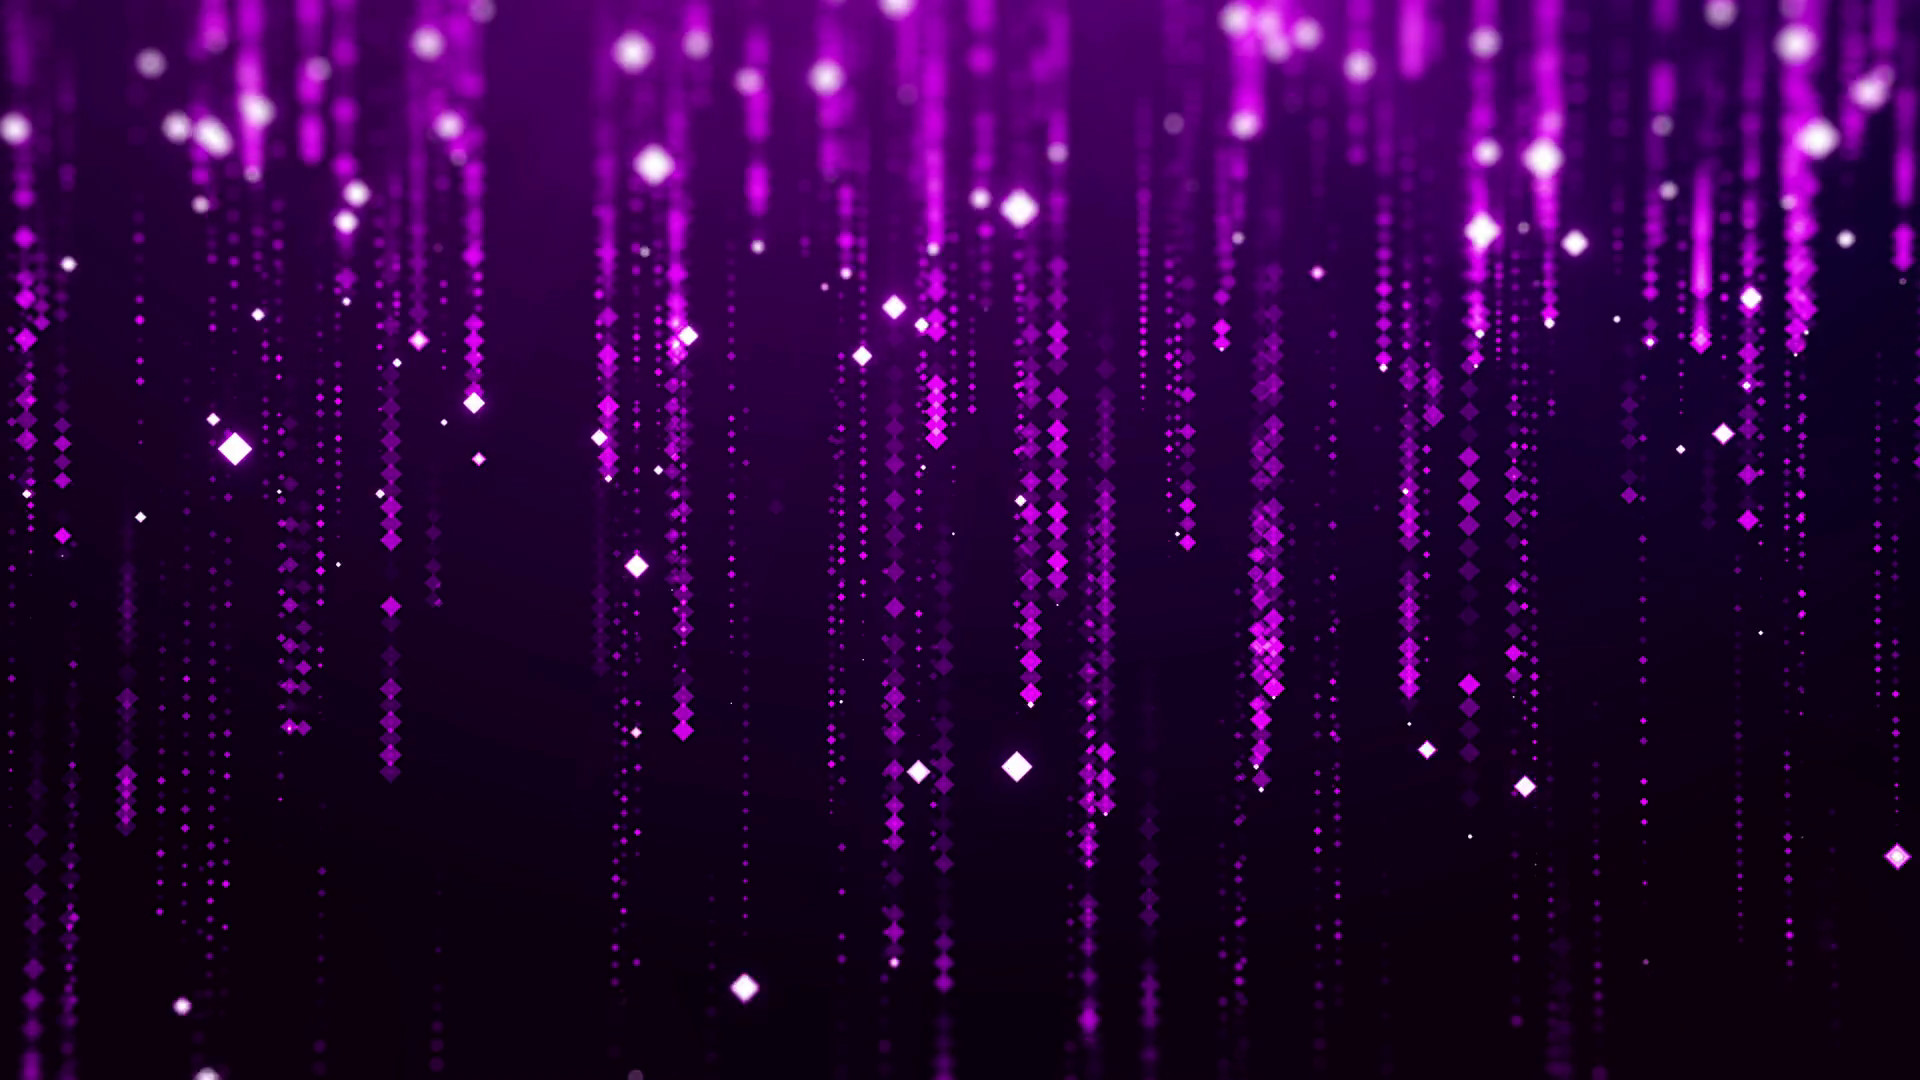 1920x1080 Abstract computer animated background with small flickering particles of purple  color falling from above against black